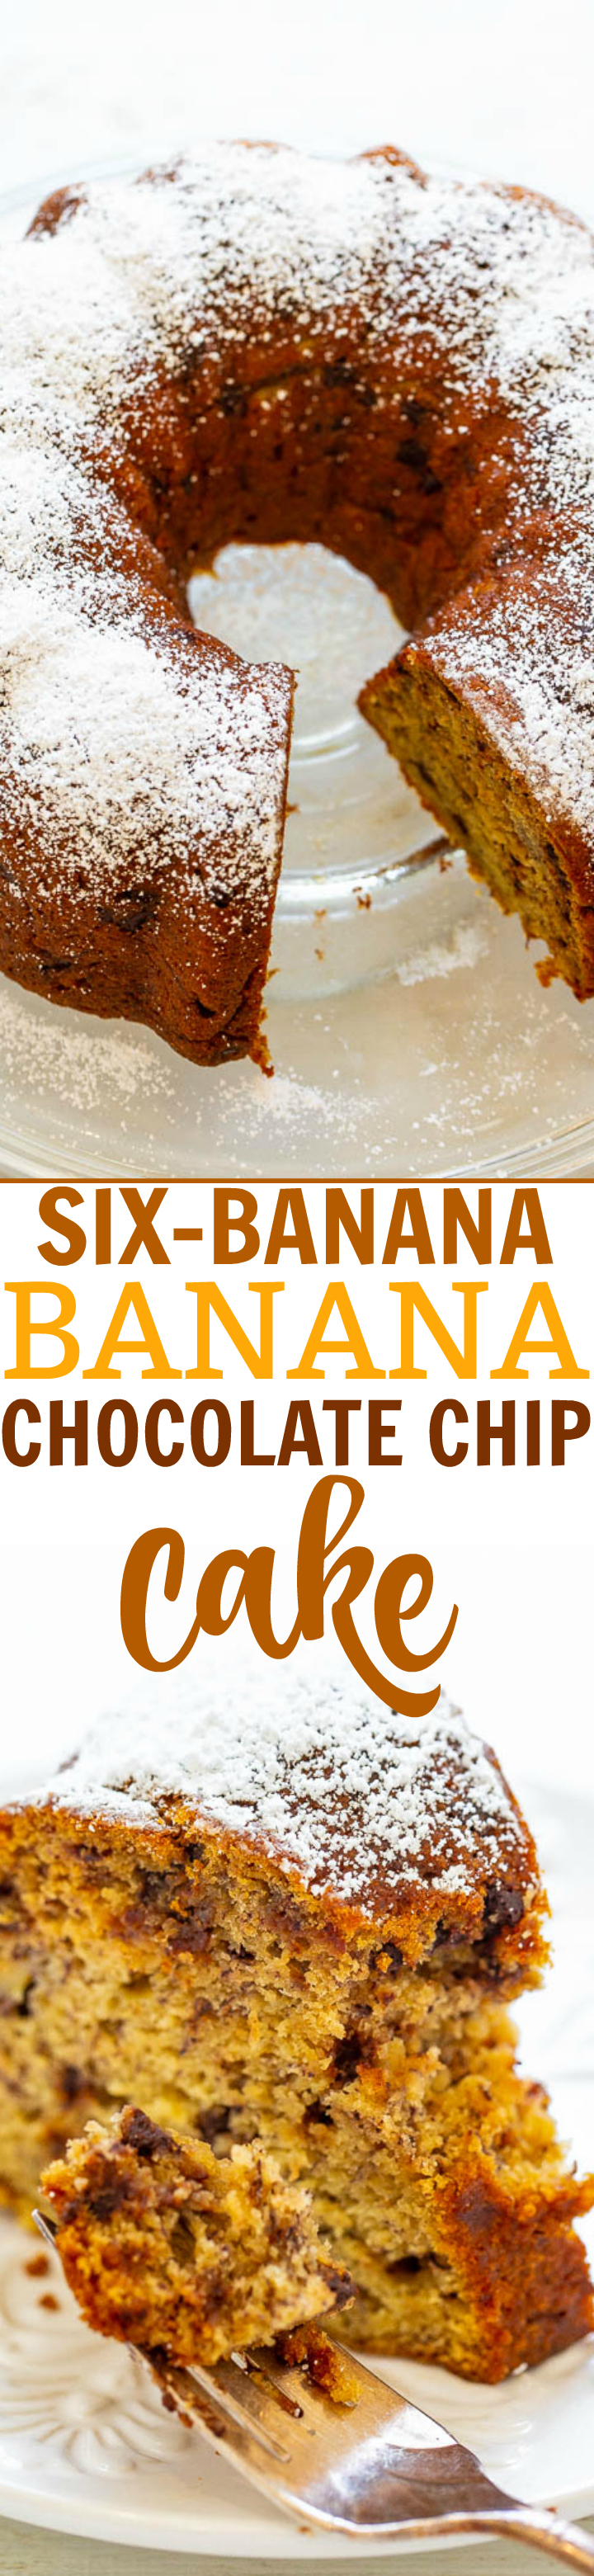 Six-Banana Banana Chocolate Chip Cake - Yes, 6 bananas in 1 cake means it's super SOFT, moist, and has robust banana flavor with chocolate chips in EVERY bite!! EASY and one bowl! Now you know what to do with all your ripe bananas!!